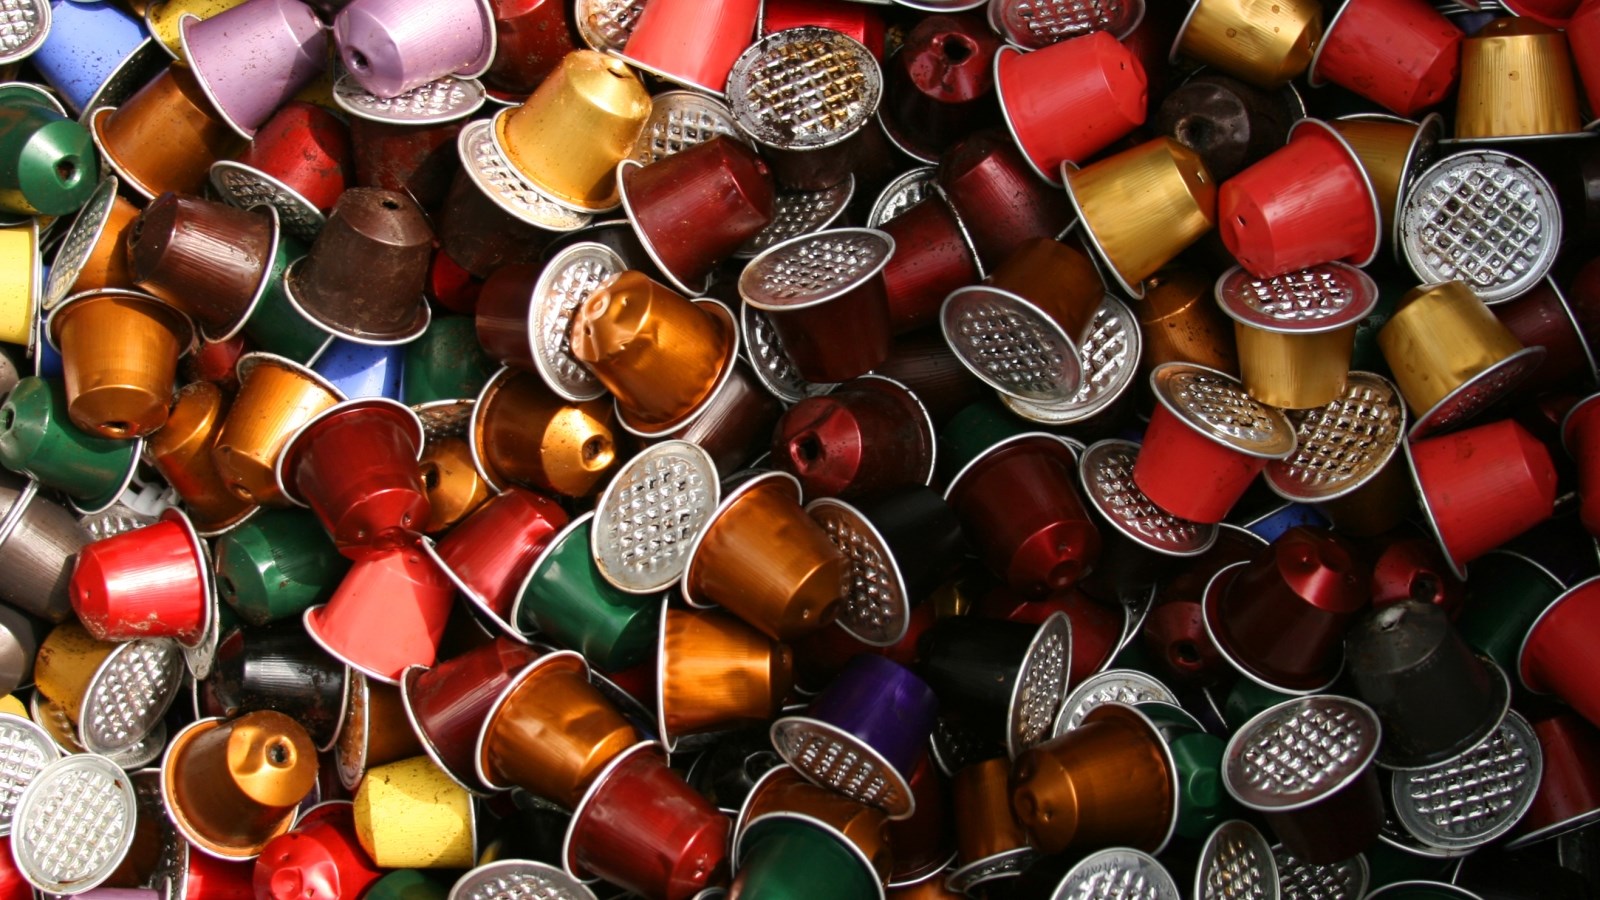 Major coffee capsule in UK are sincere about their aluminium coffee pod recycling